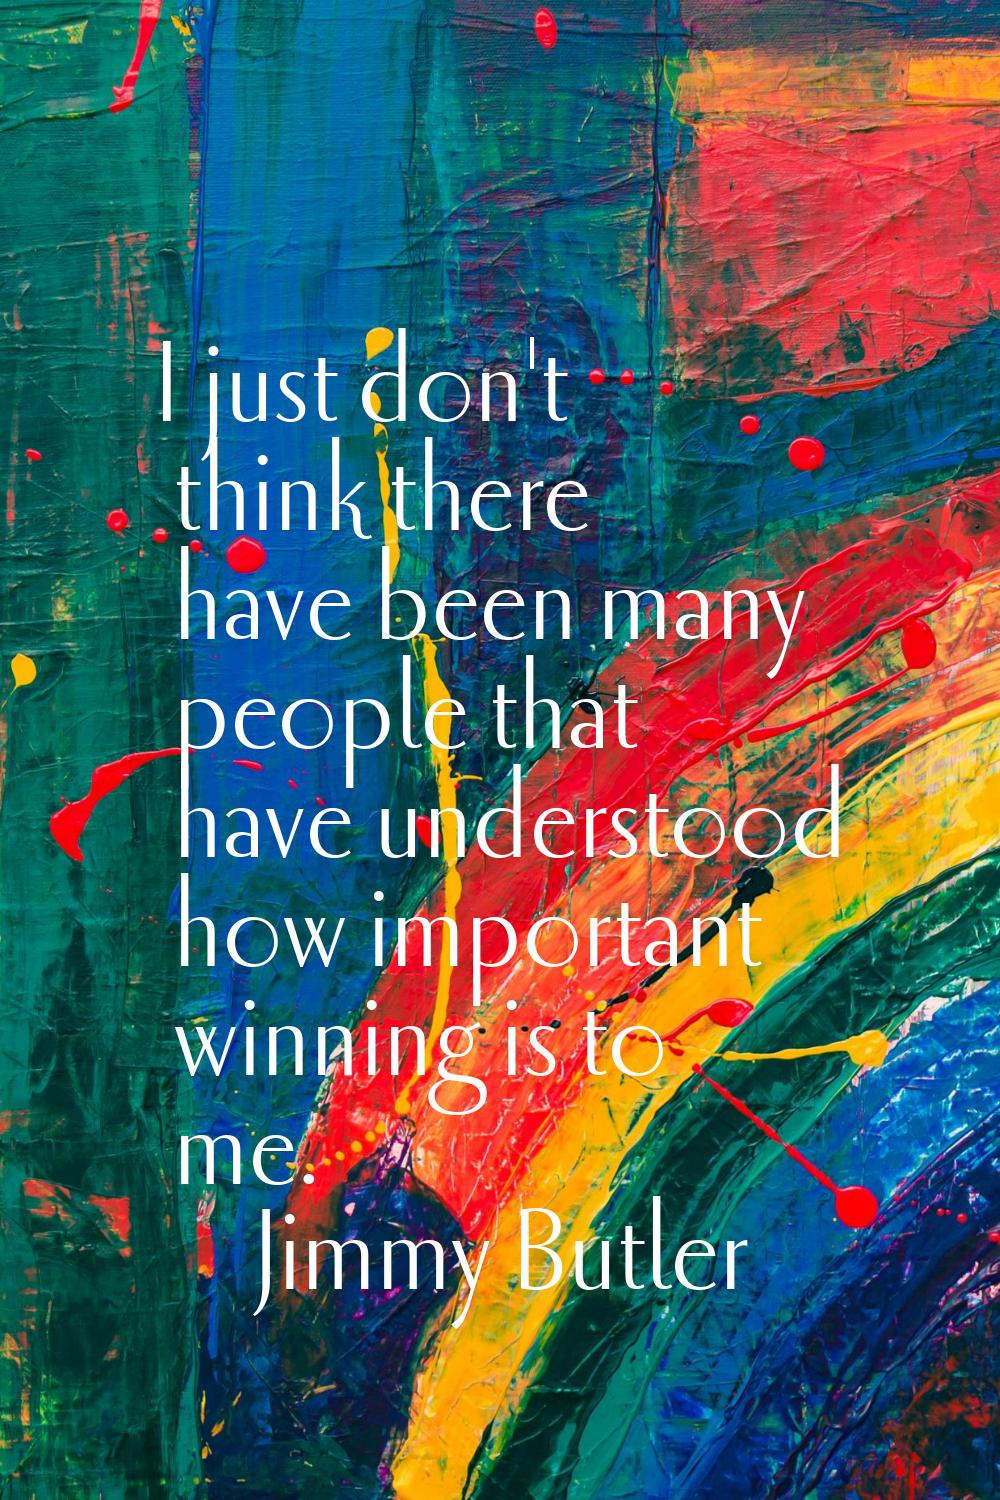 I just don't think there have been many people that have understood how important winning is to me.